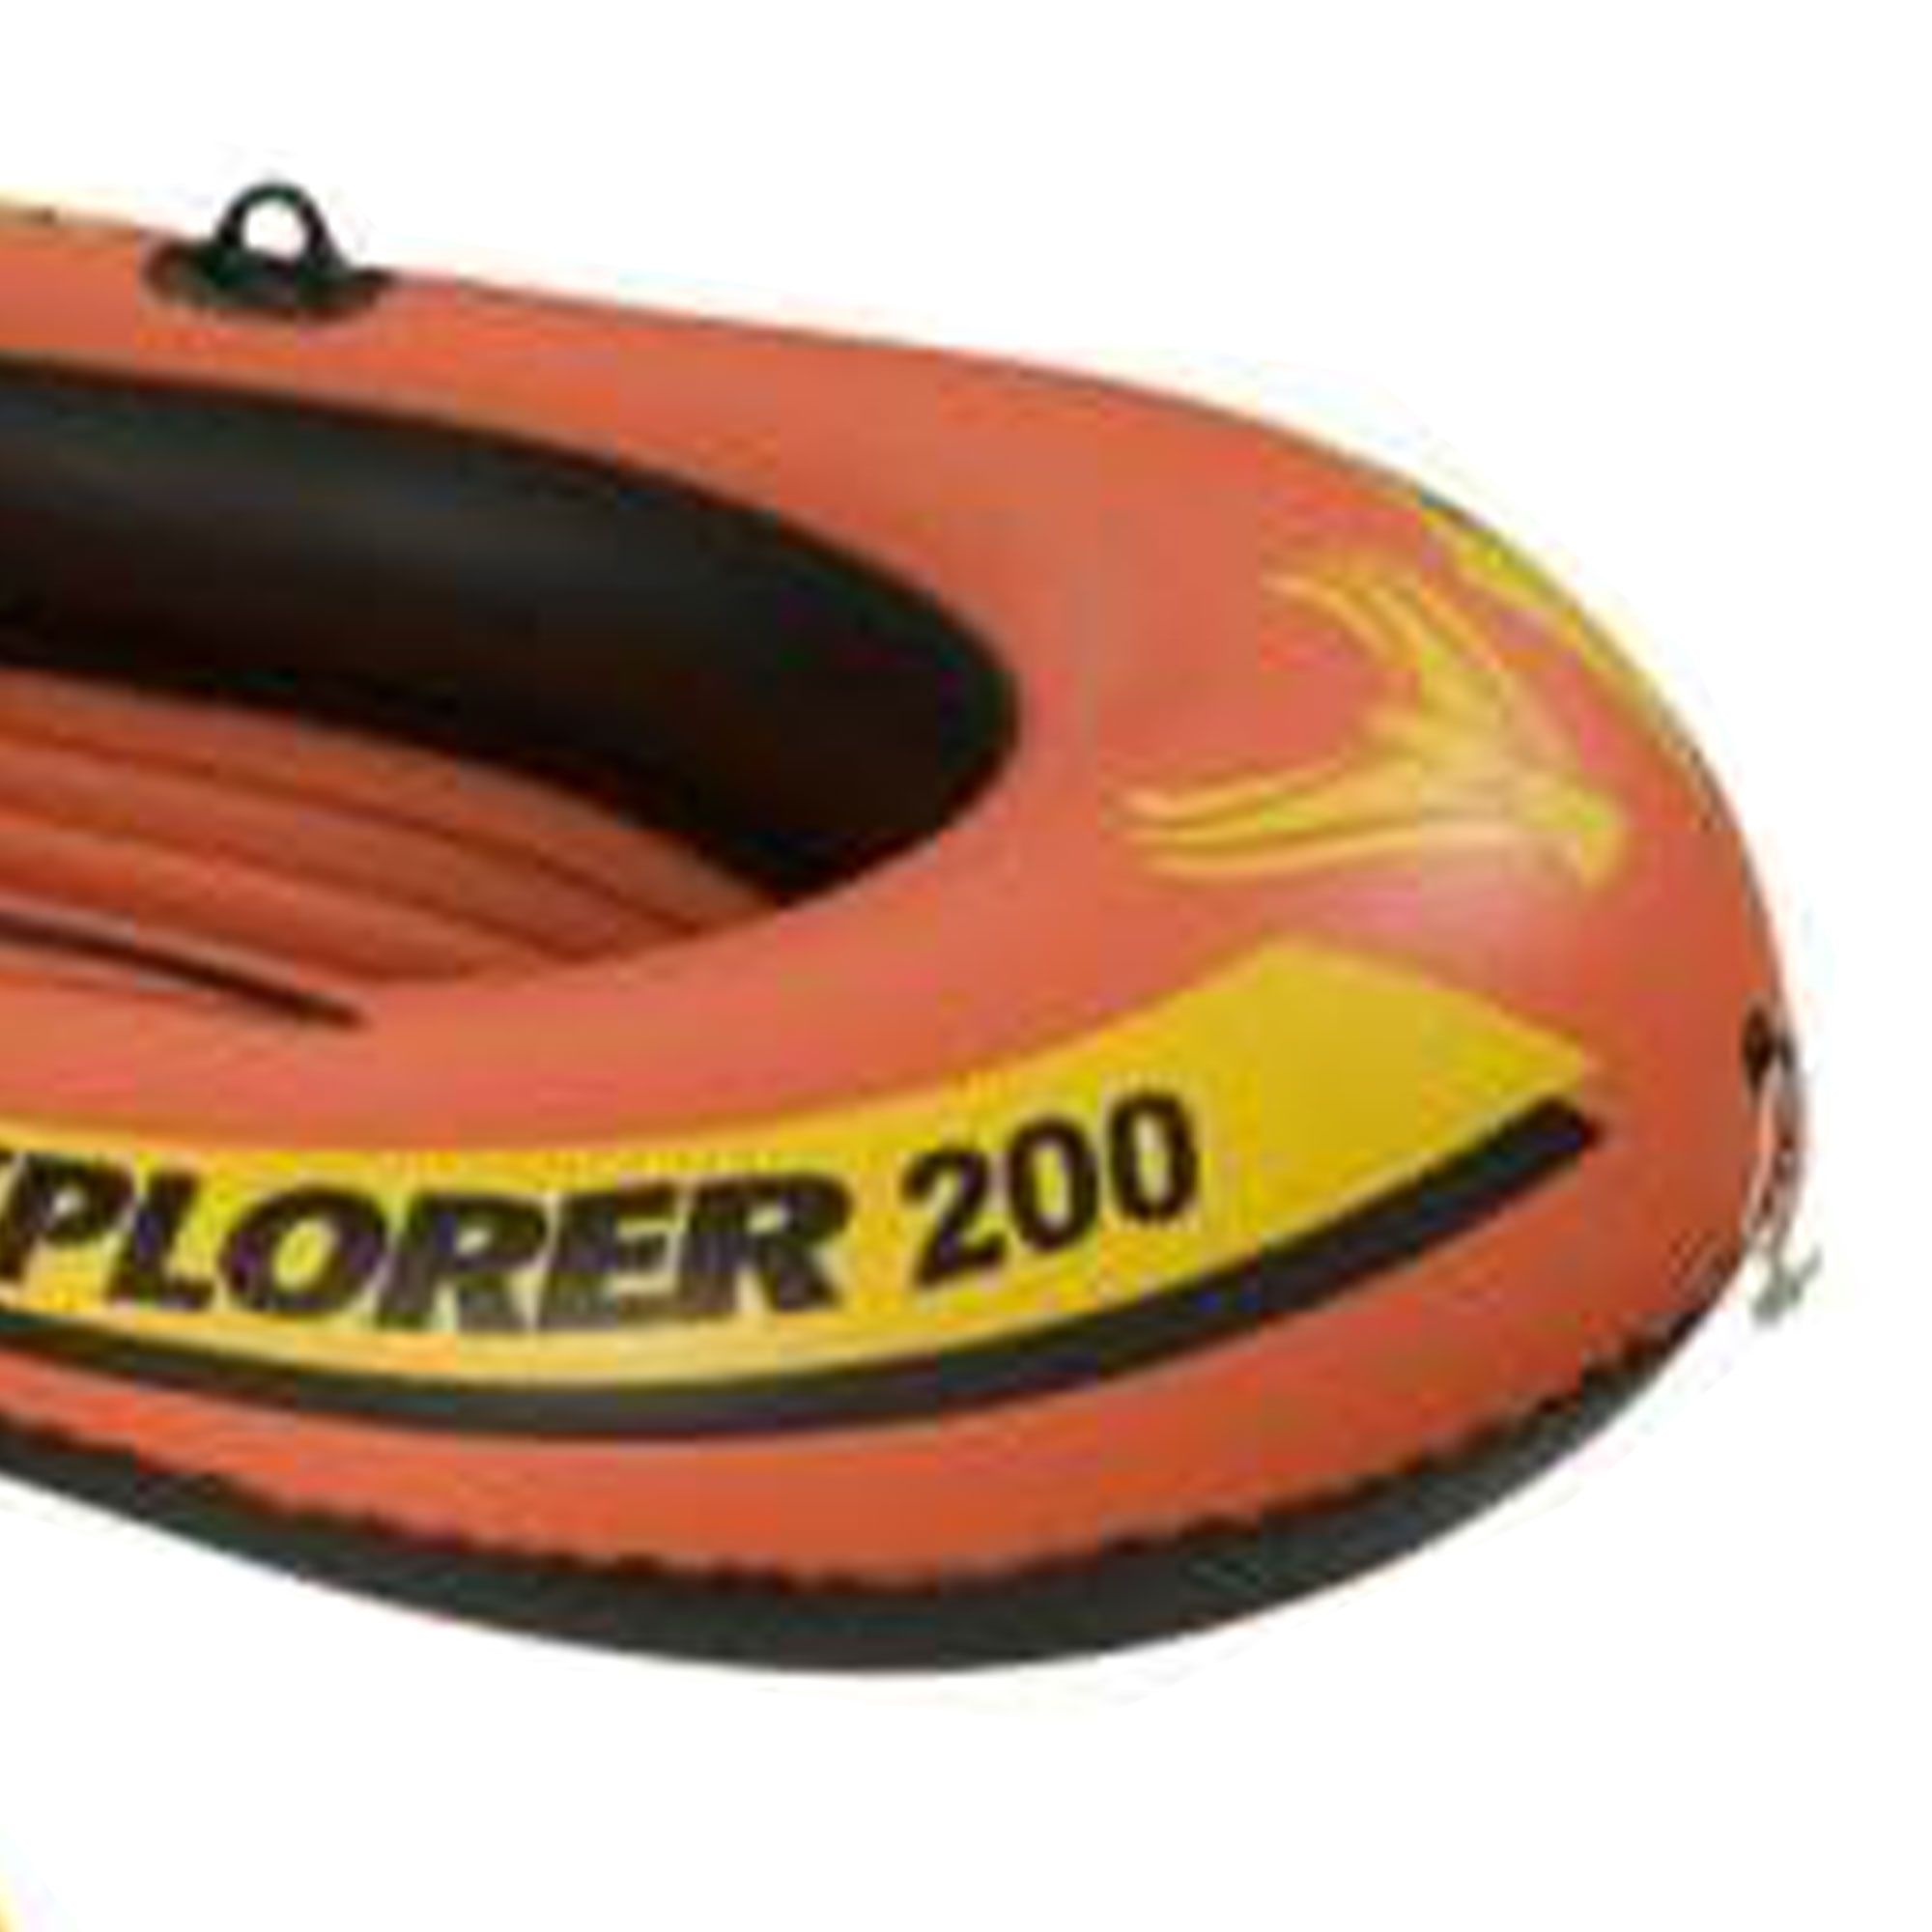 Intex Explorer 200 Inflatable 2 Person River Boat Raft w/ Oars & Pump (2 Pack) - image 4 of 6